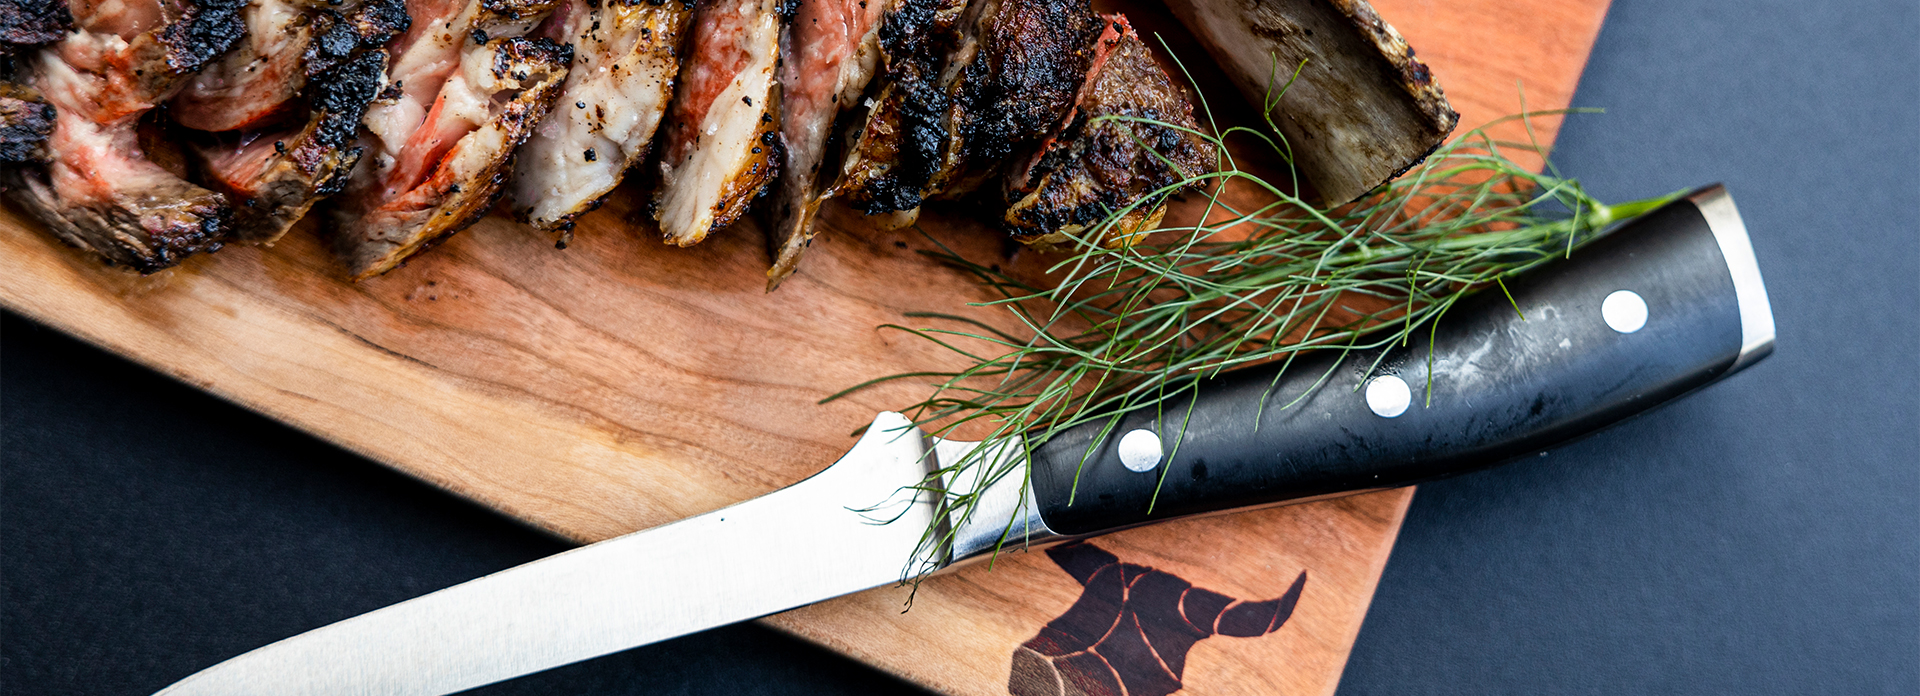 cropped image of meat on a cutting board with a steak knife 